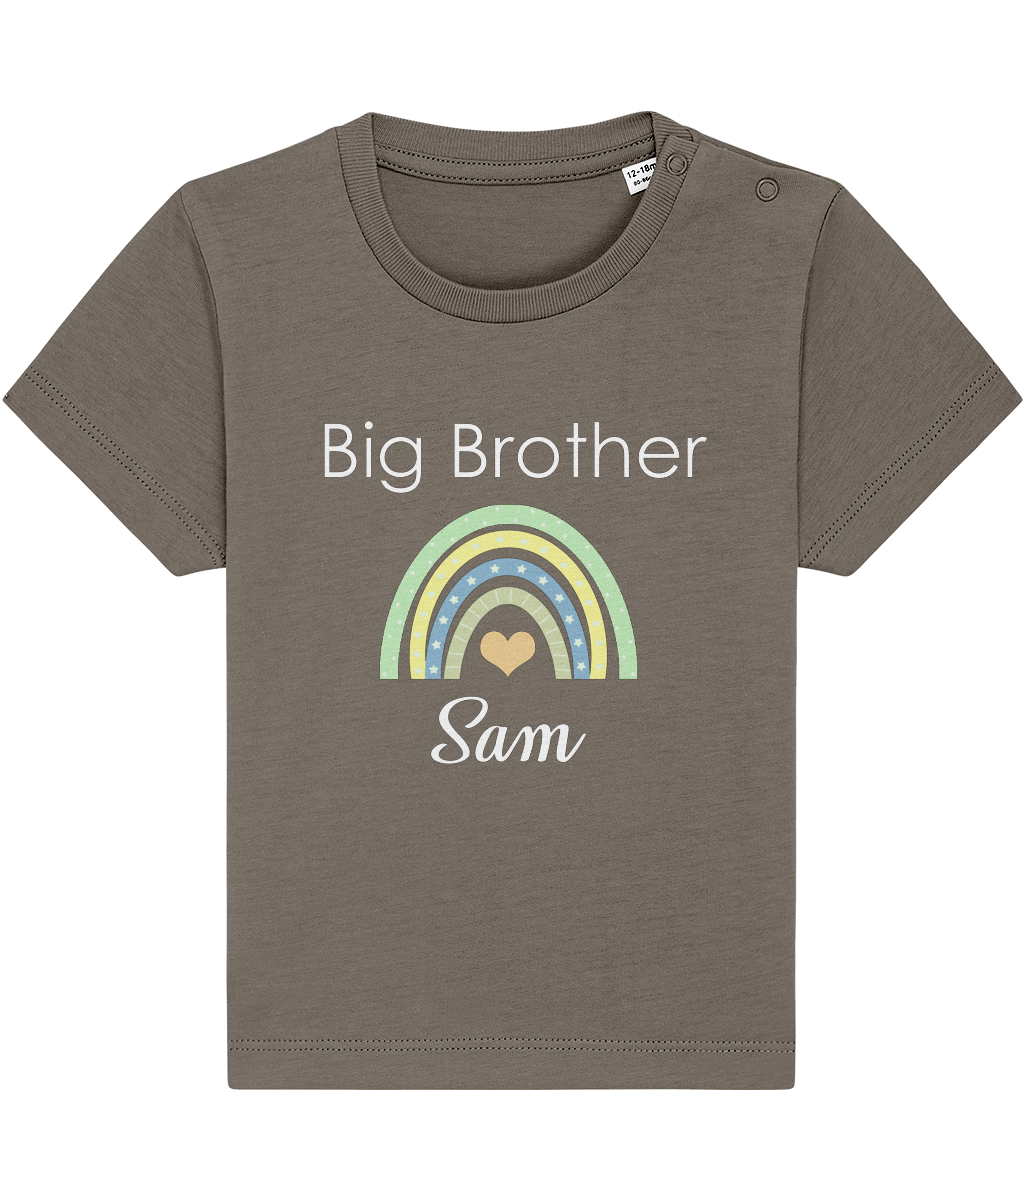 Big Brother T-Shirt (small sizes)